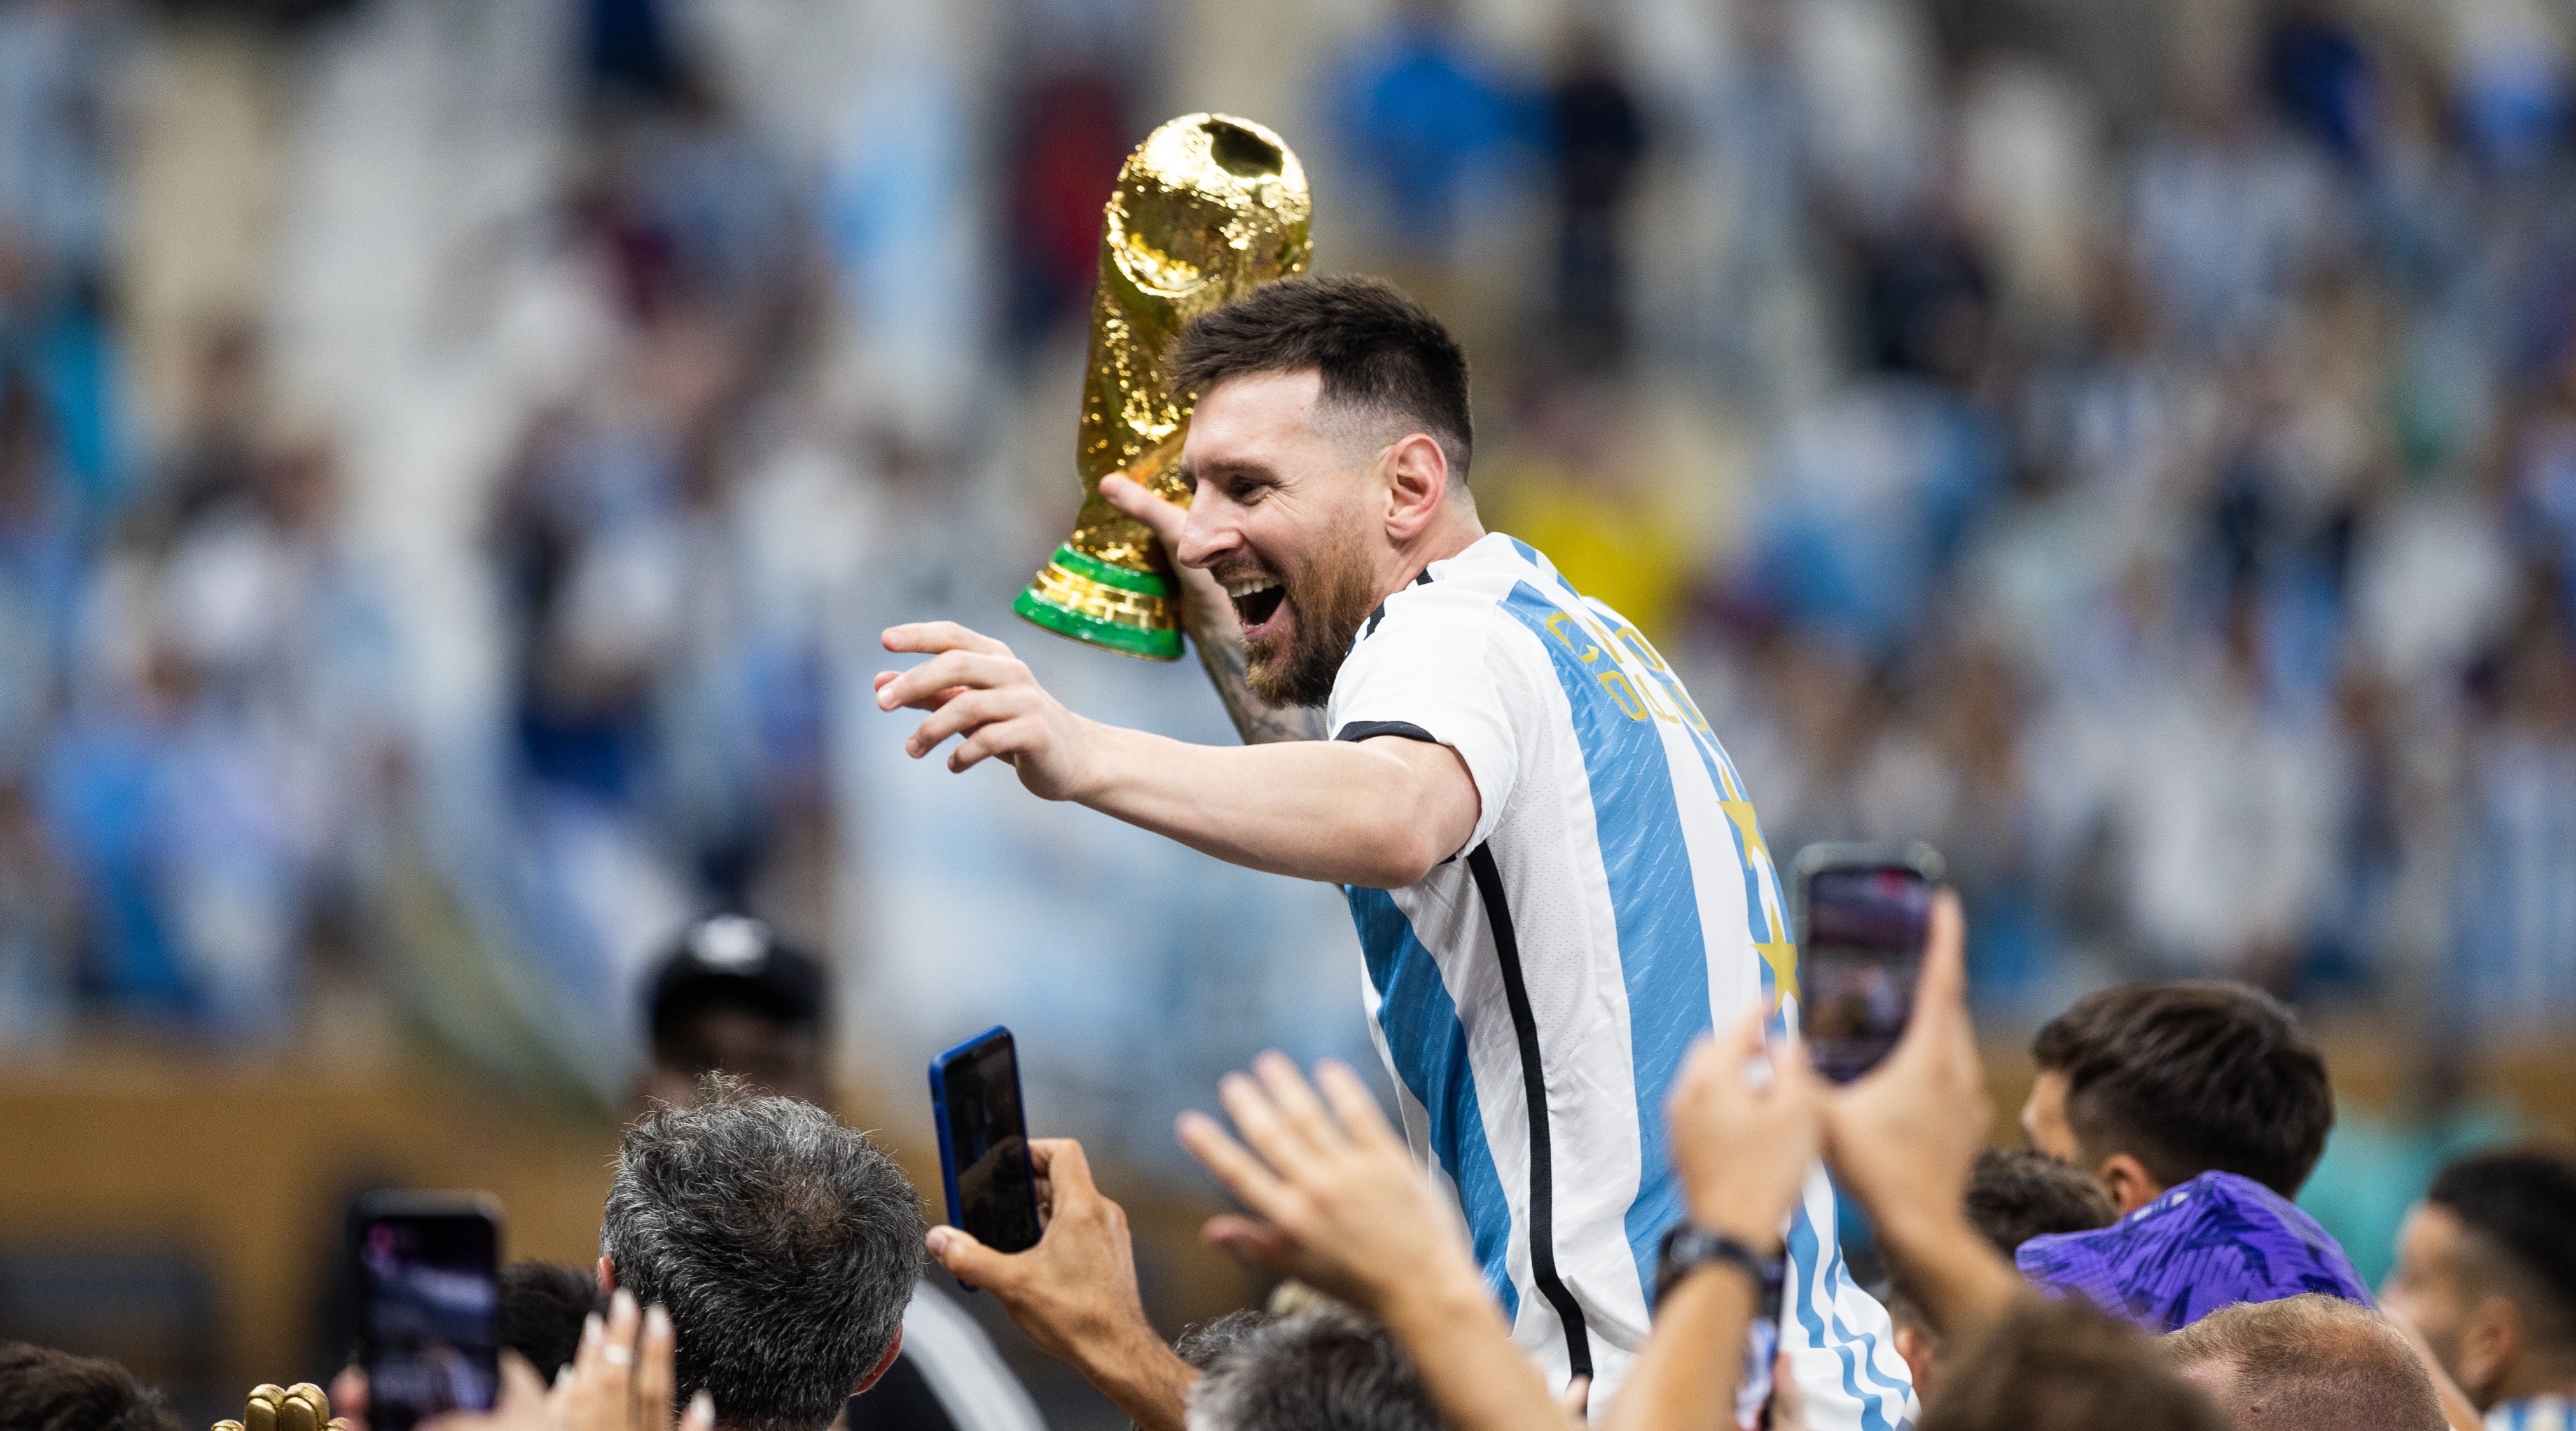 Lionel Messi of Argentina holds the World Cup trophy while being held aloft by teammates after Argentina beat France to win the FIFA World Cup 2022 on December 18, 2022 in Qatar.